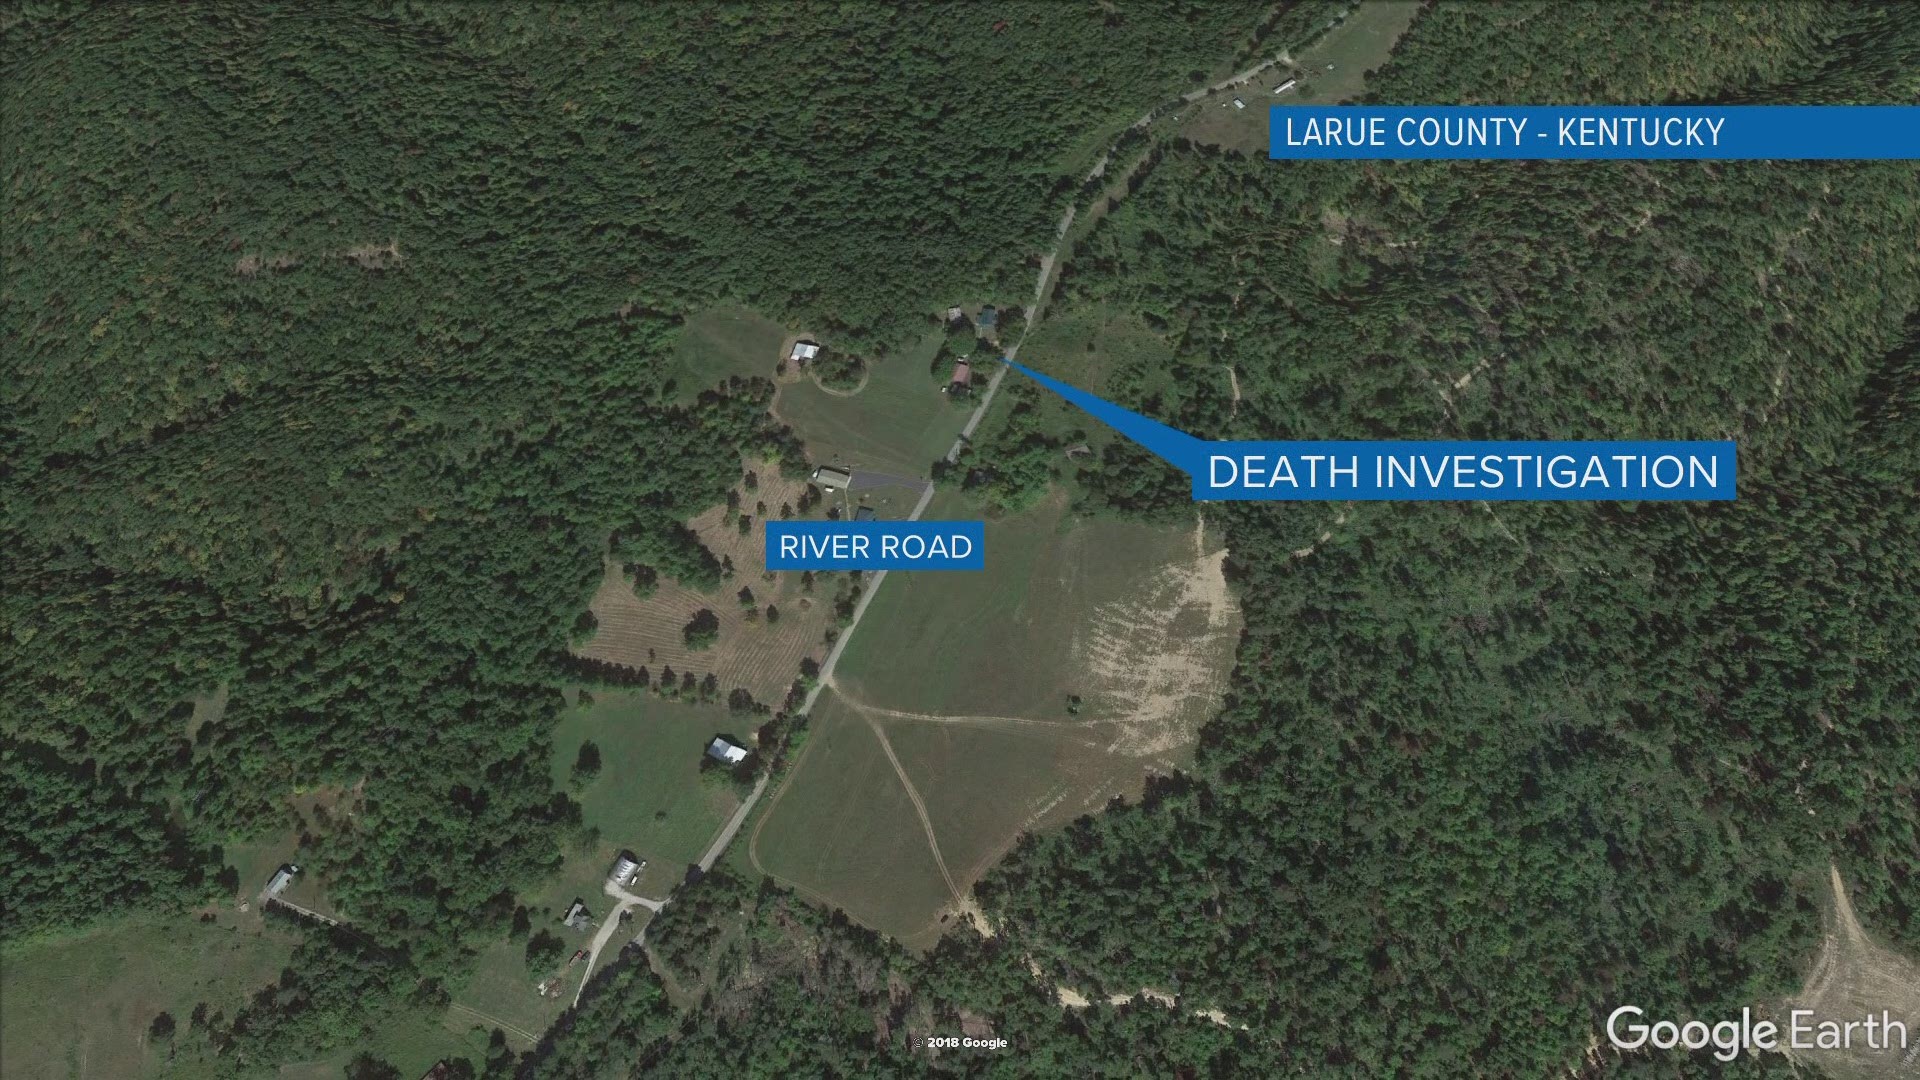 A death investigation is underway in LaRue County after reports of a shooting and fire led police to two bodies.